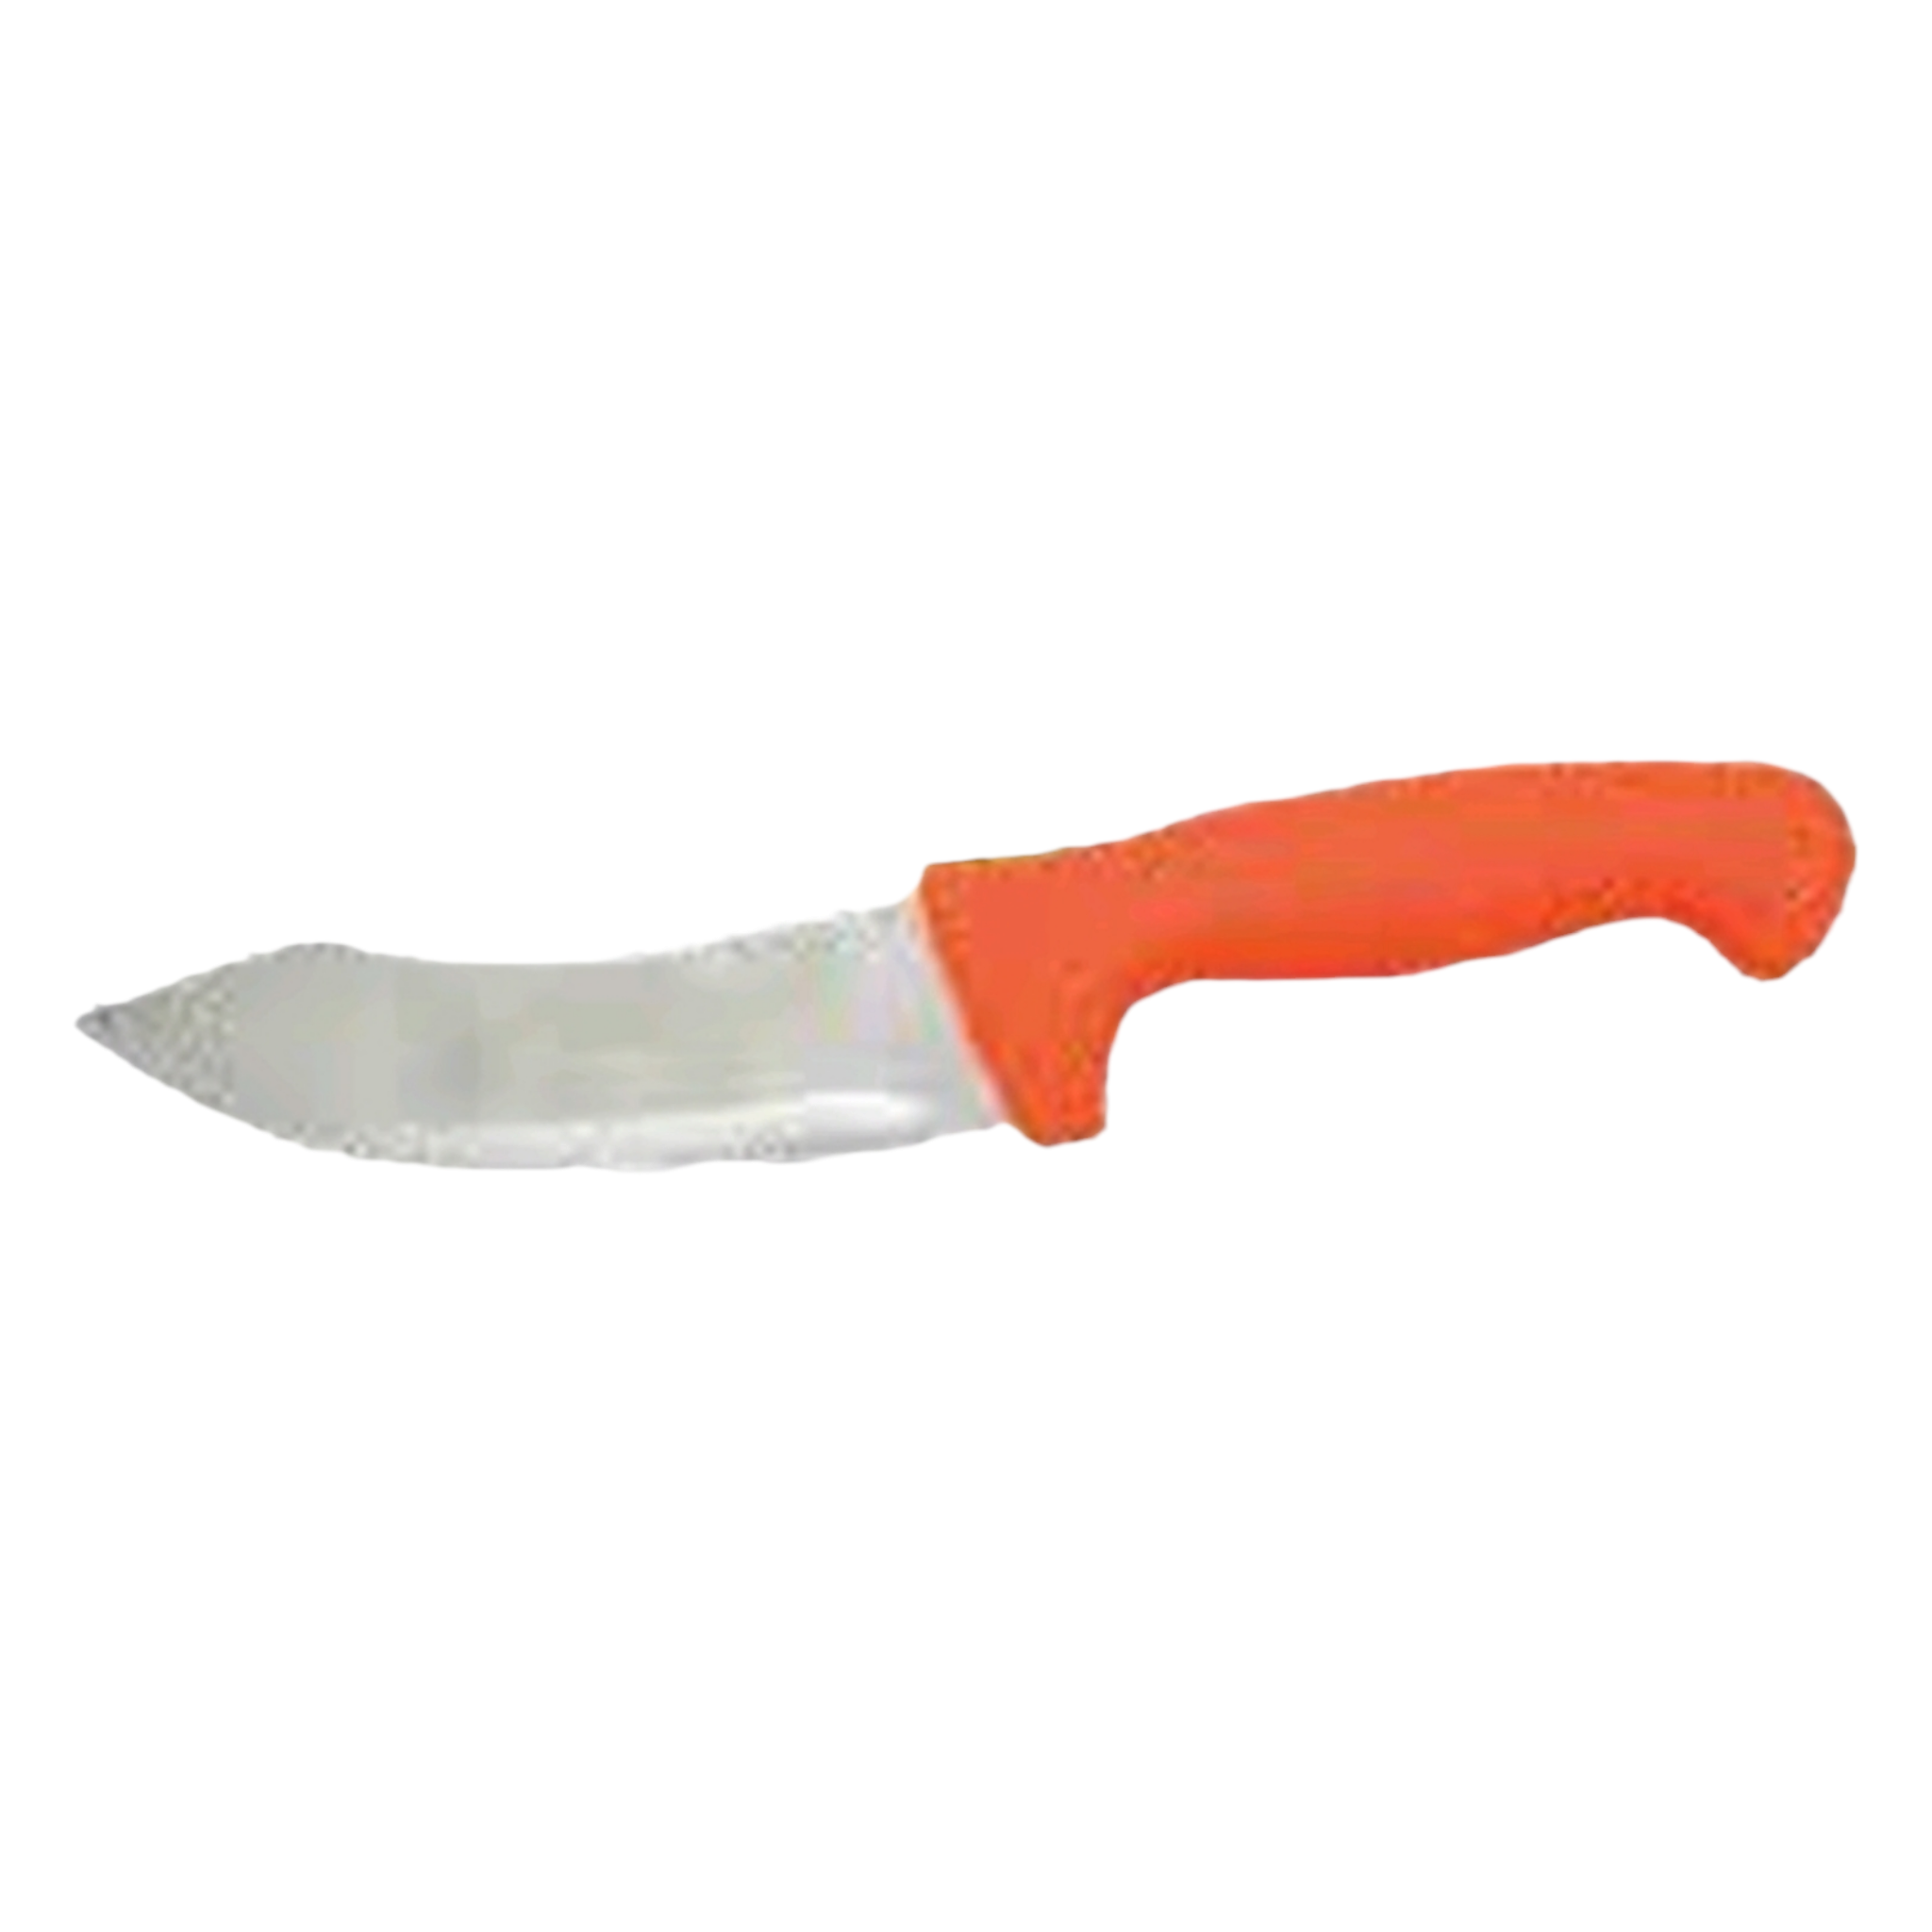 Kitchen Knife Stainless Steel 8Inch 20cm KN0267-8